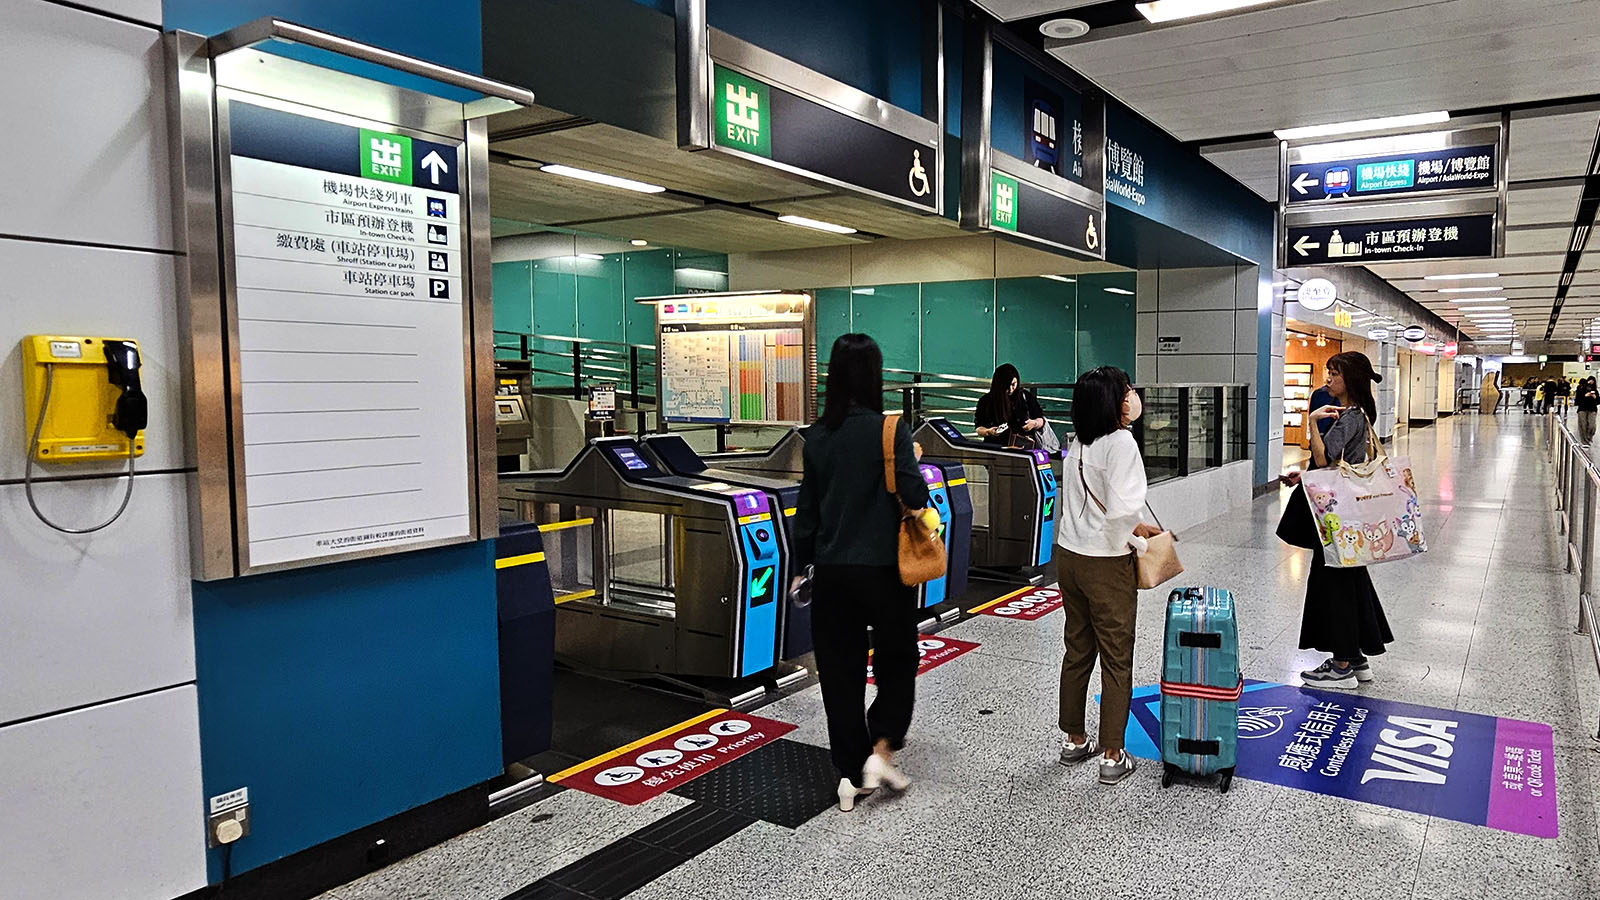 Finding the station for Hong Kong In-Town Check-In